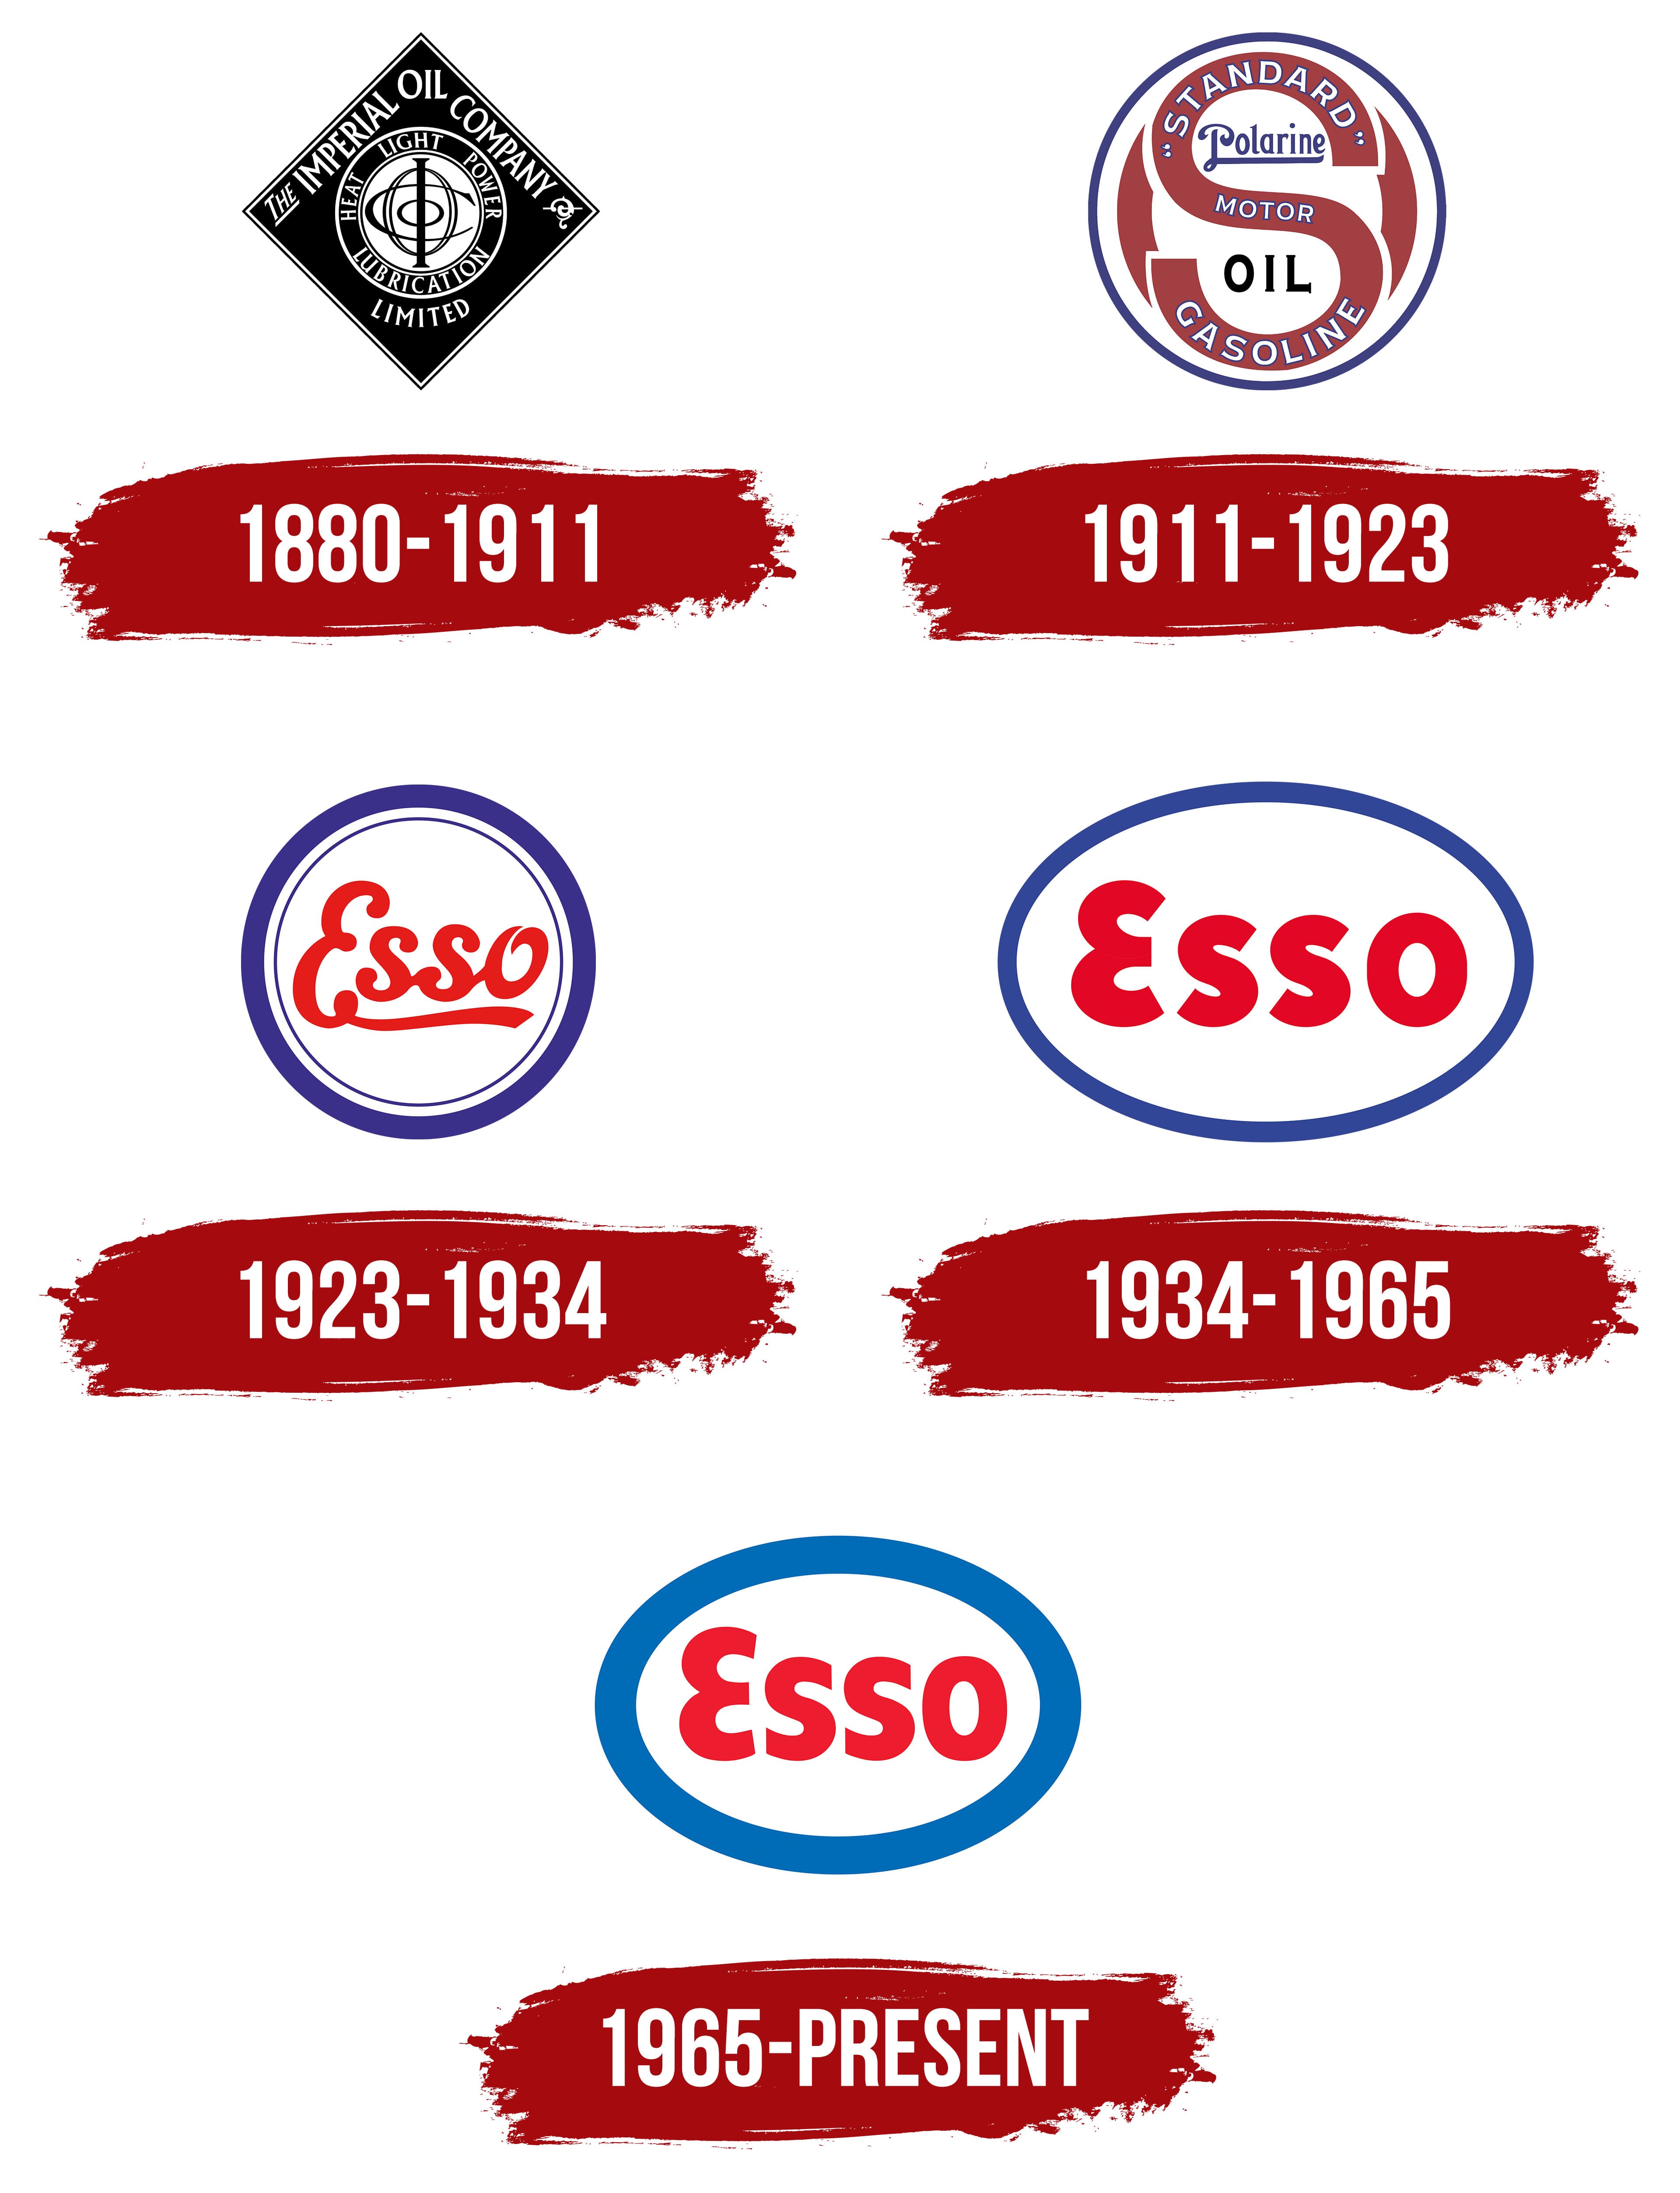 Esso Logo, symbol, meaning, history, PNG, brand